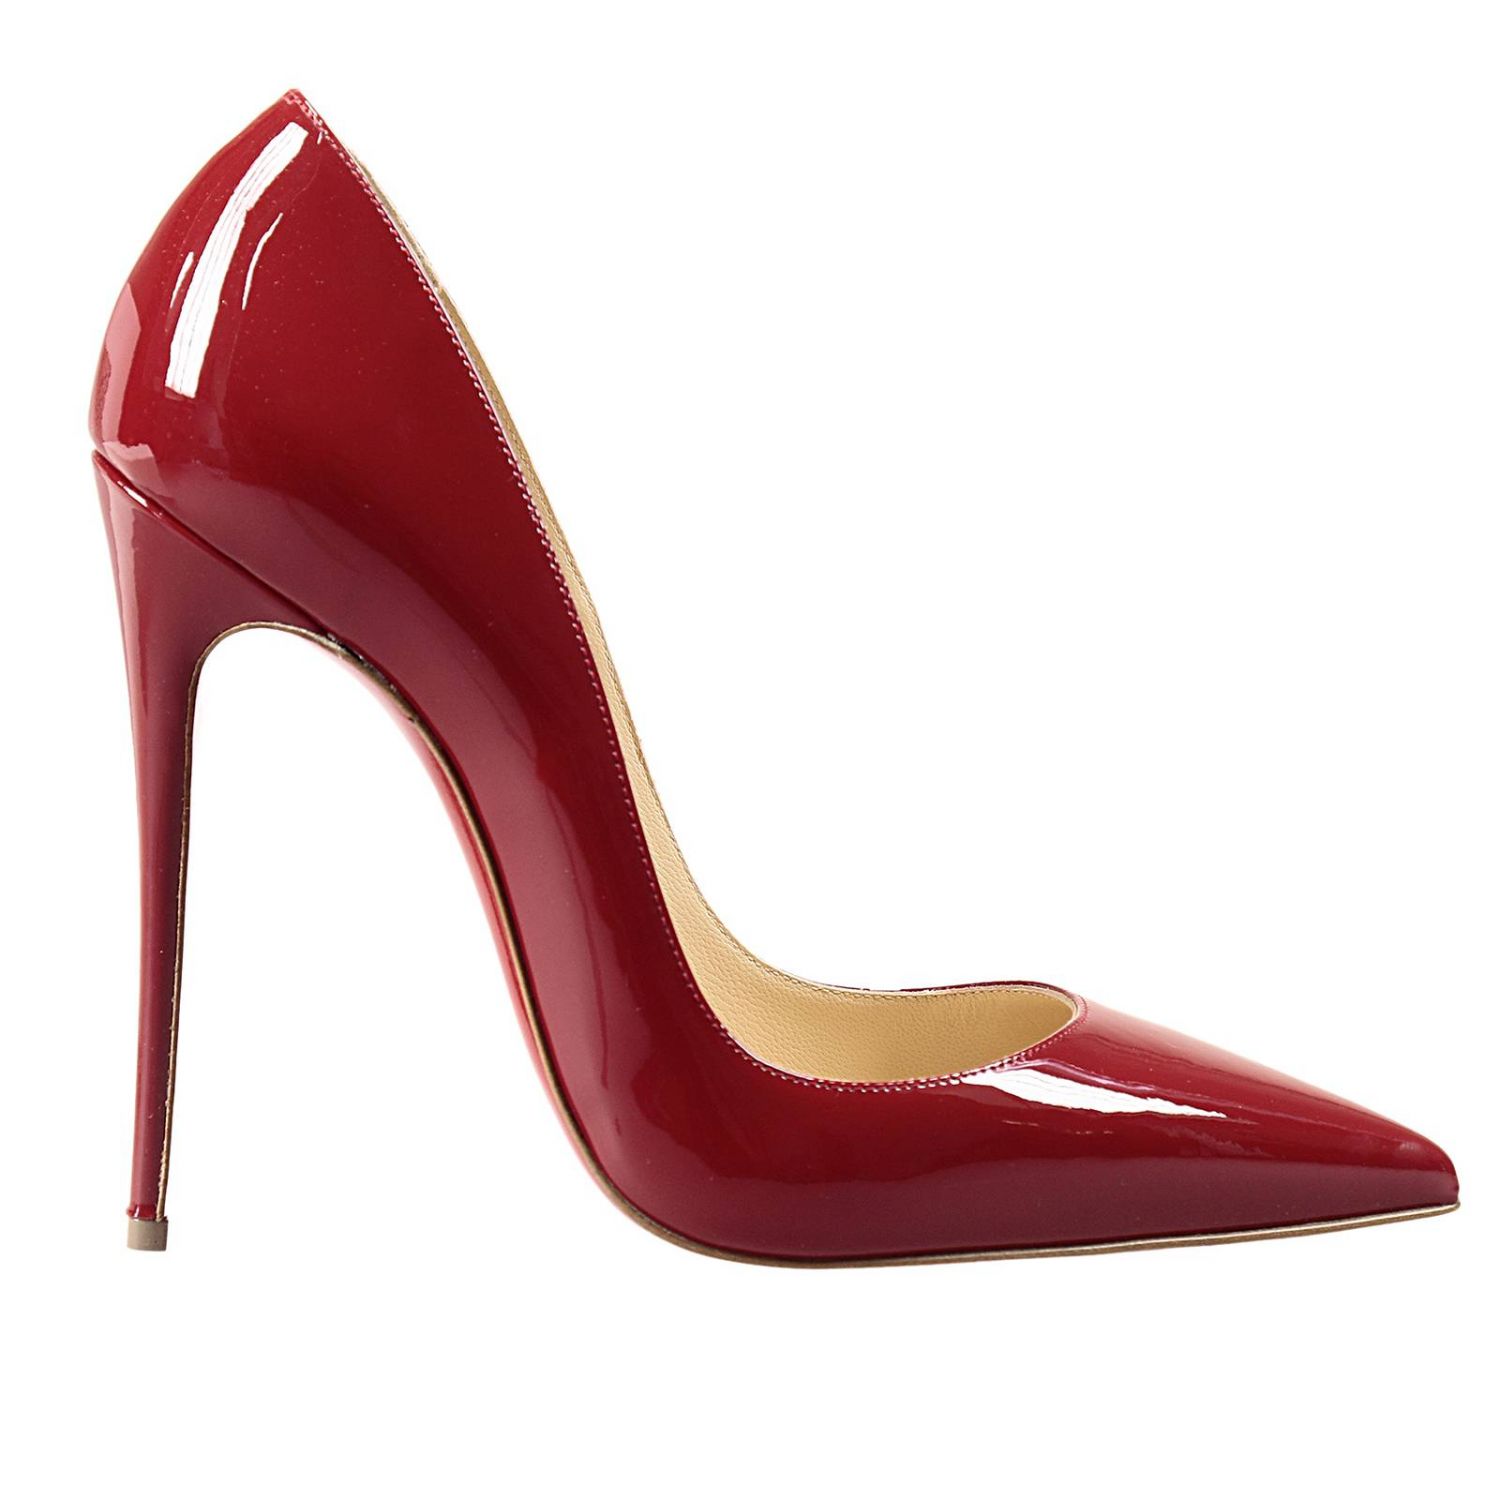 CHRISTIAN LOUBOUTIN: SO KATE HELL 12 PUMP PATENT | High Heel Shoes ...